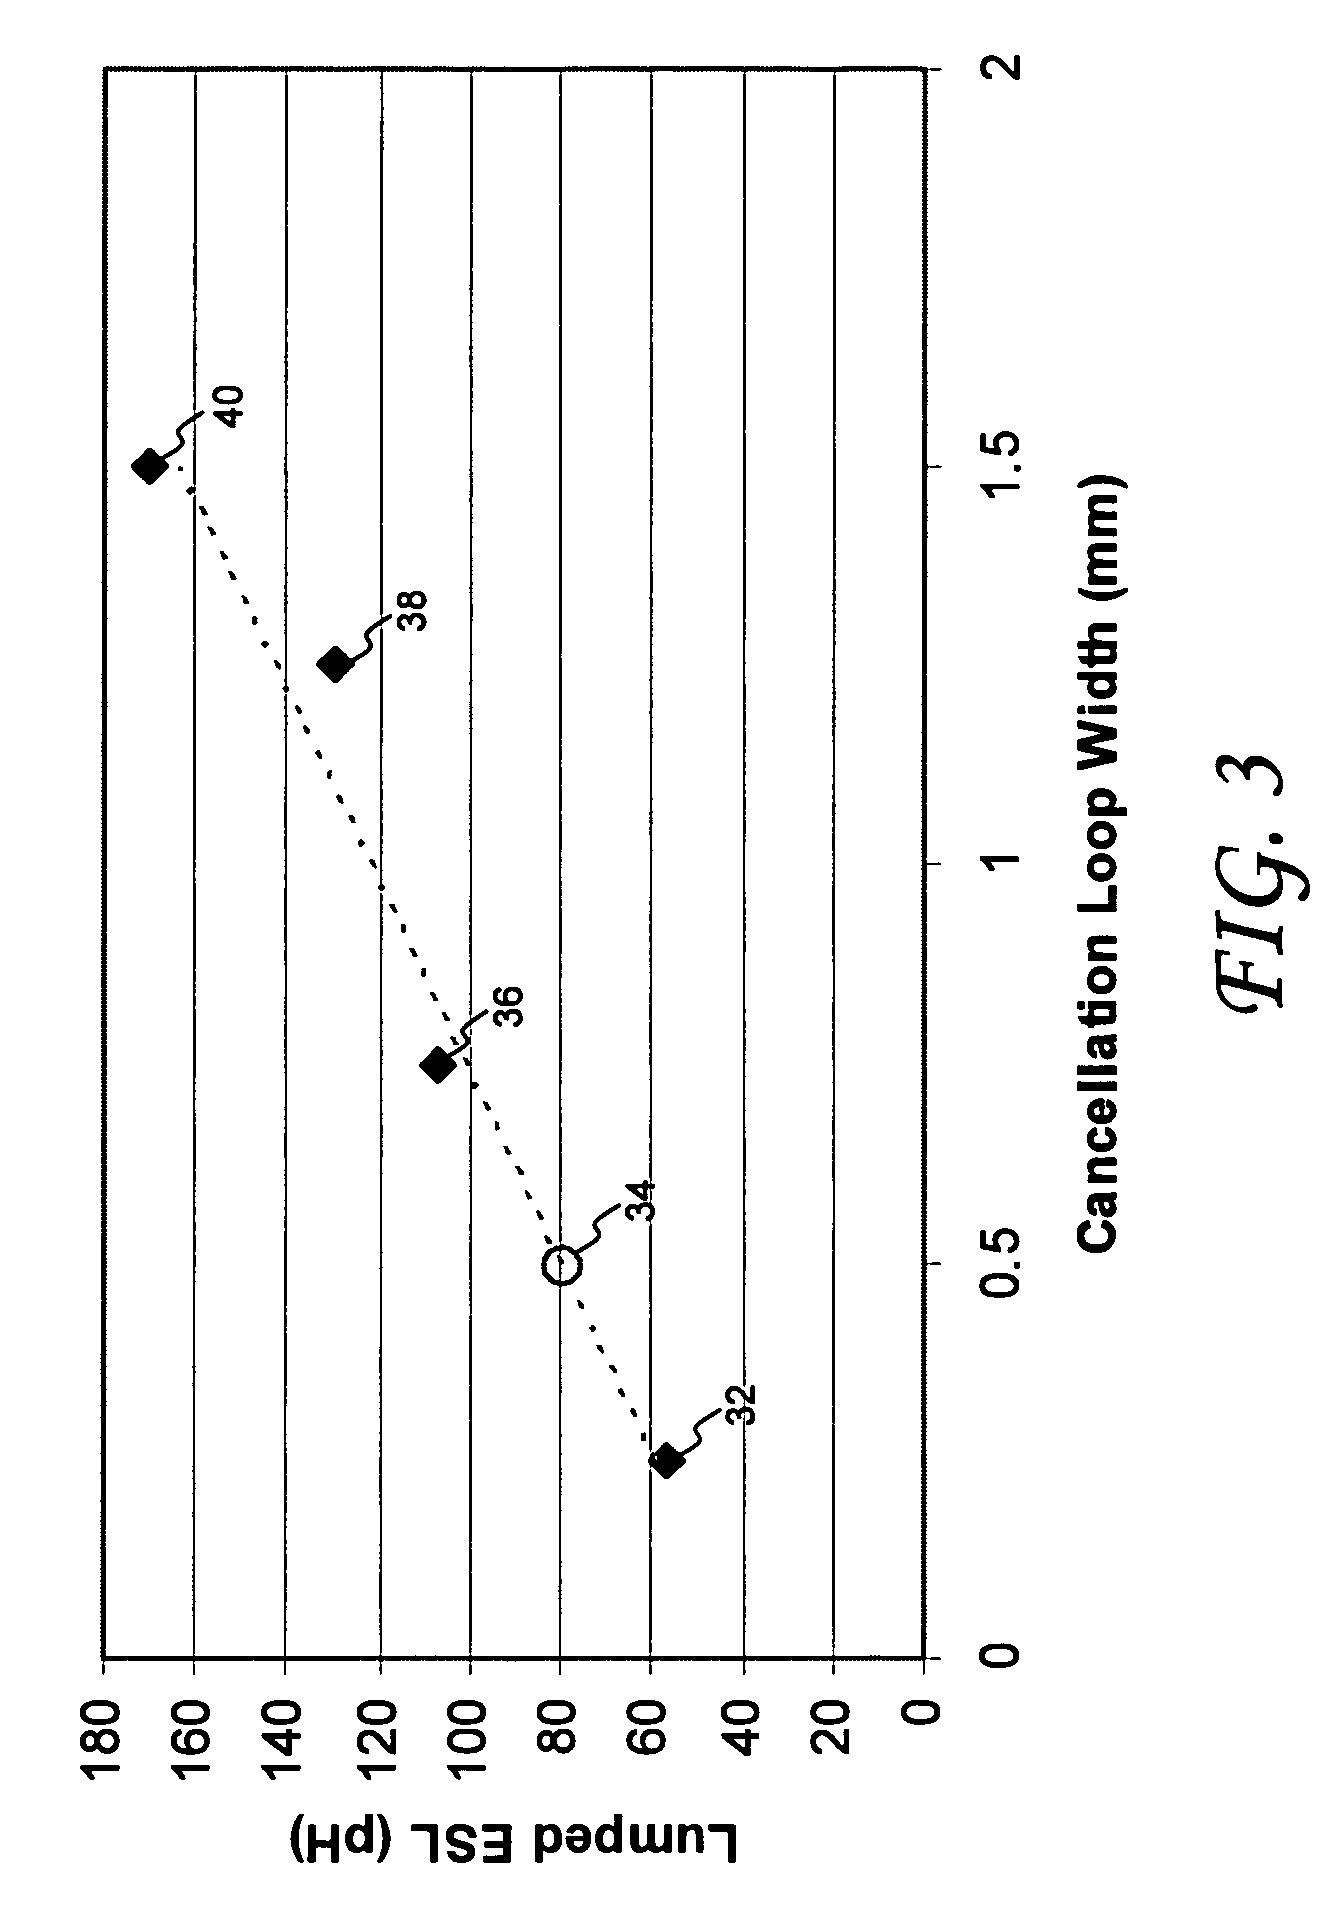 Multilayer ceramic capacitor with internal current cancellation and bottom terminals